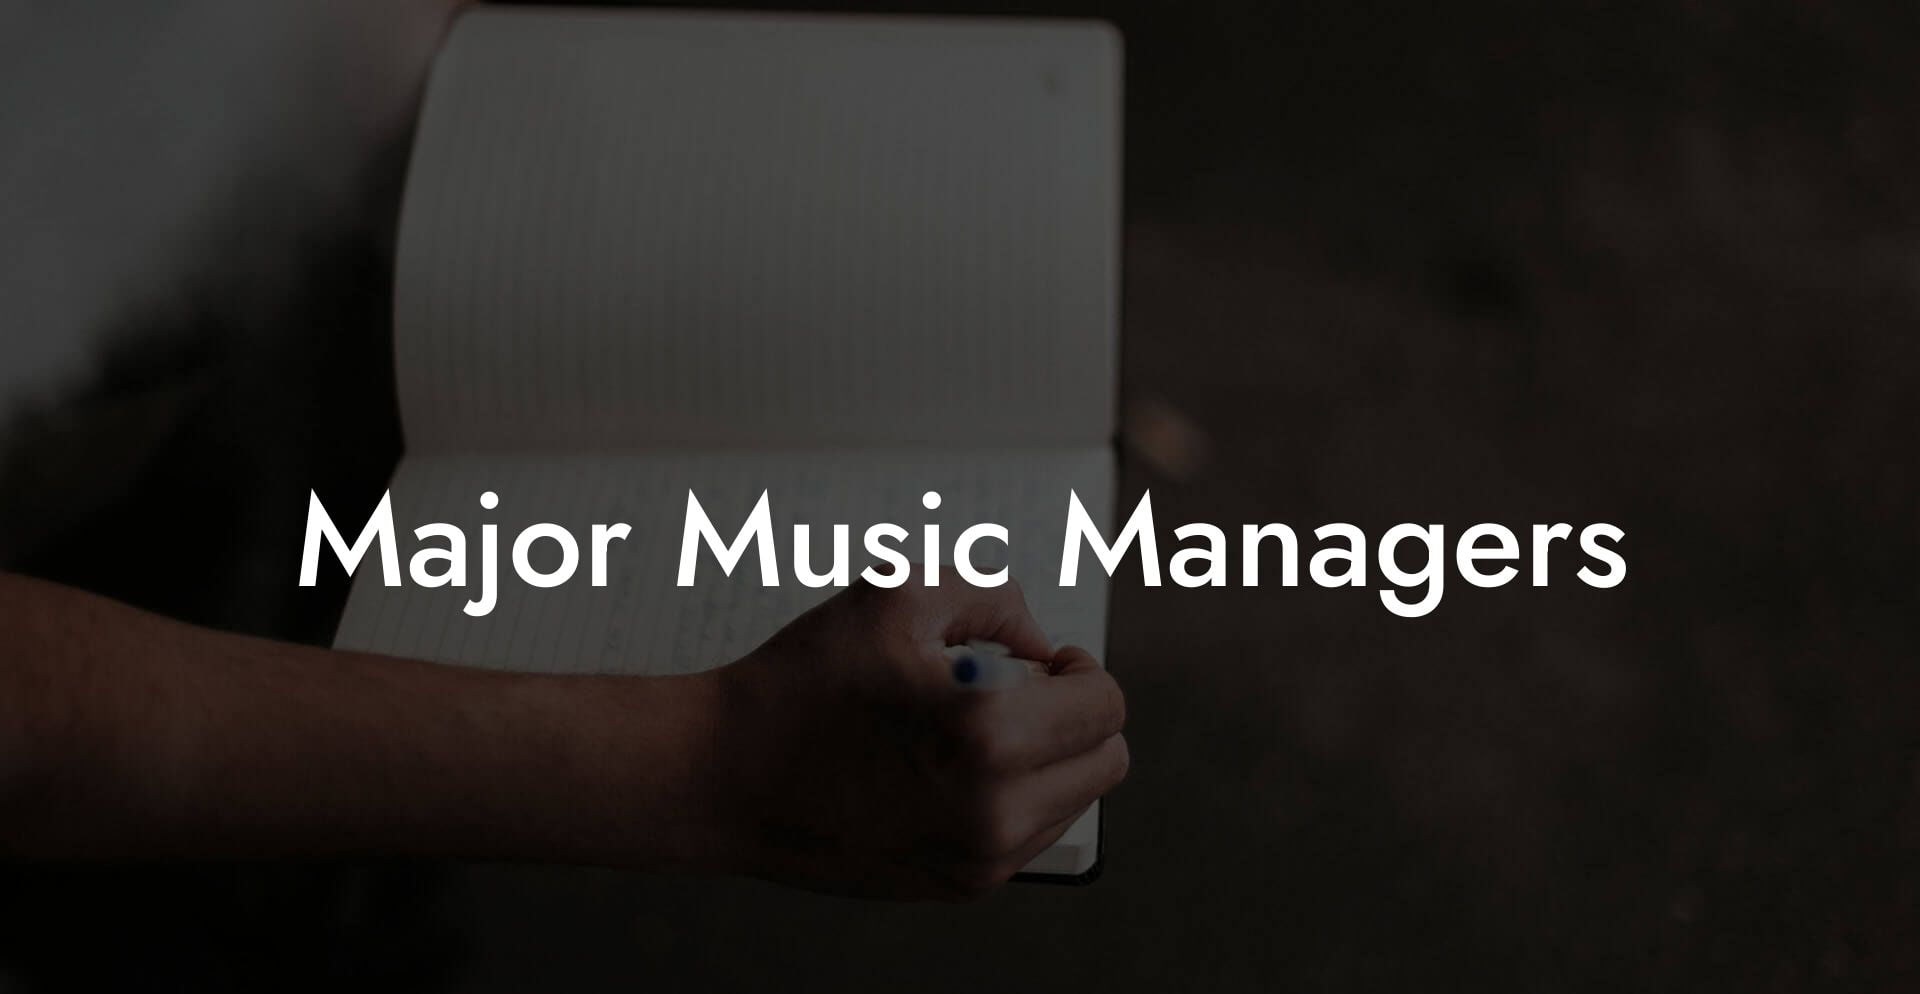 Major Music Managers